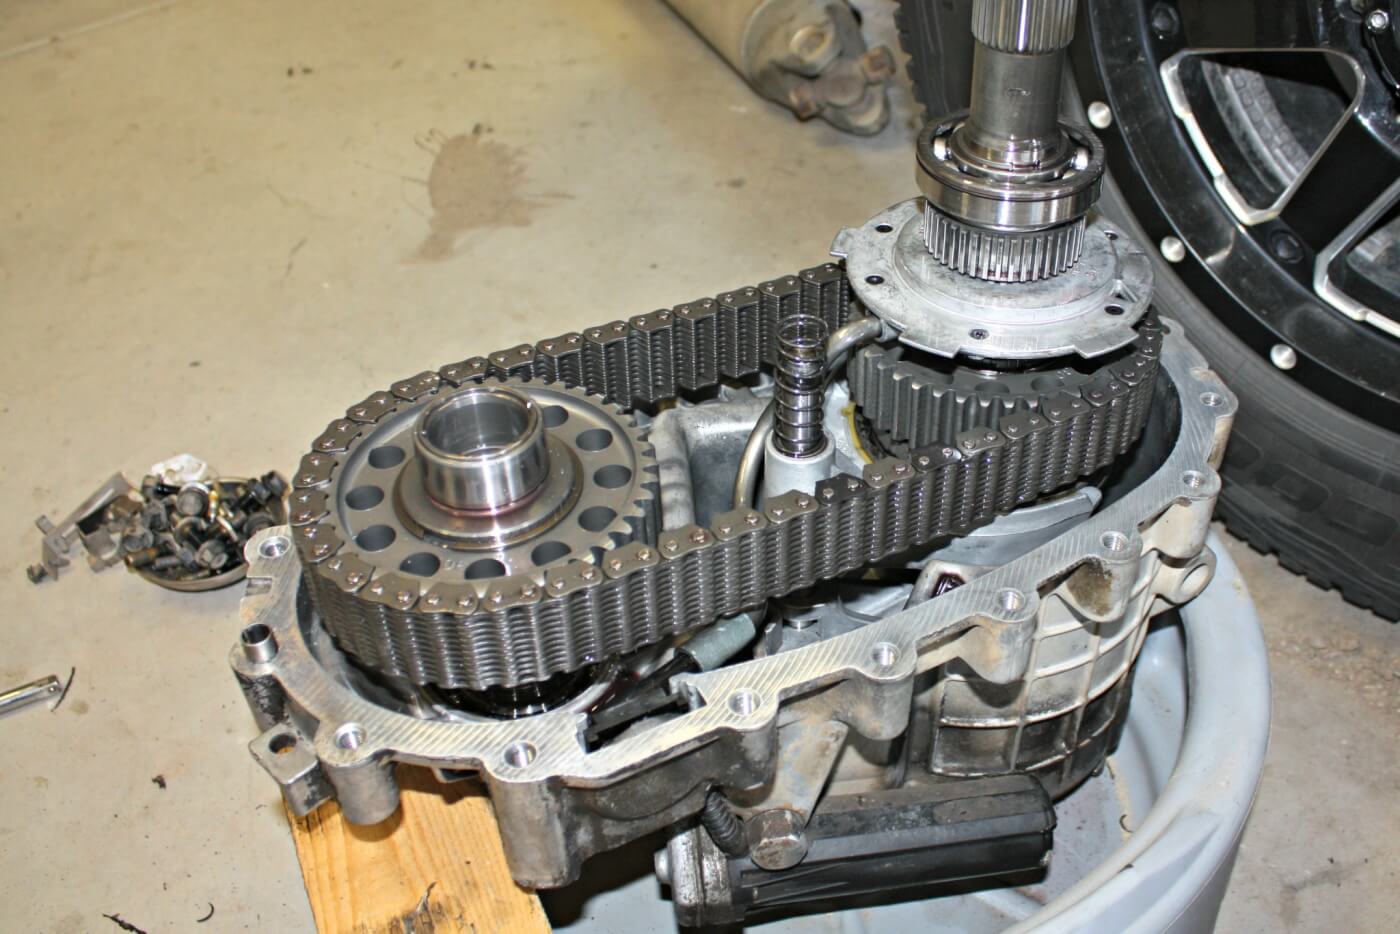 16. If you’ve never seen the inside of a transfer case, they can be a bit intimidating, but swapping out the pump itself is a fairly straight forward and easy task. The pump (located on the right) will slide right off the tail shaft once the snap ring, bearing, and gear have been removed.